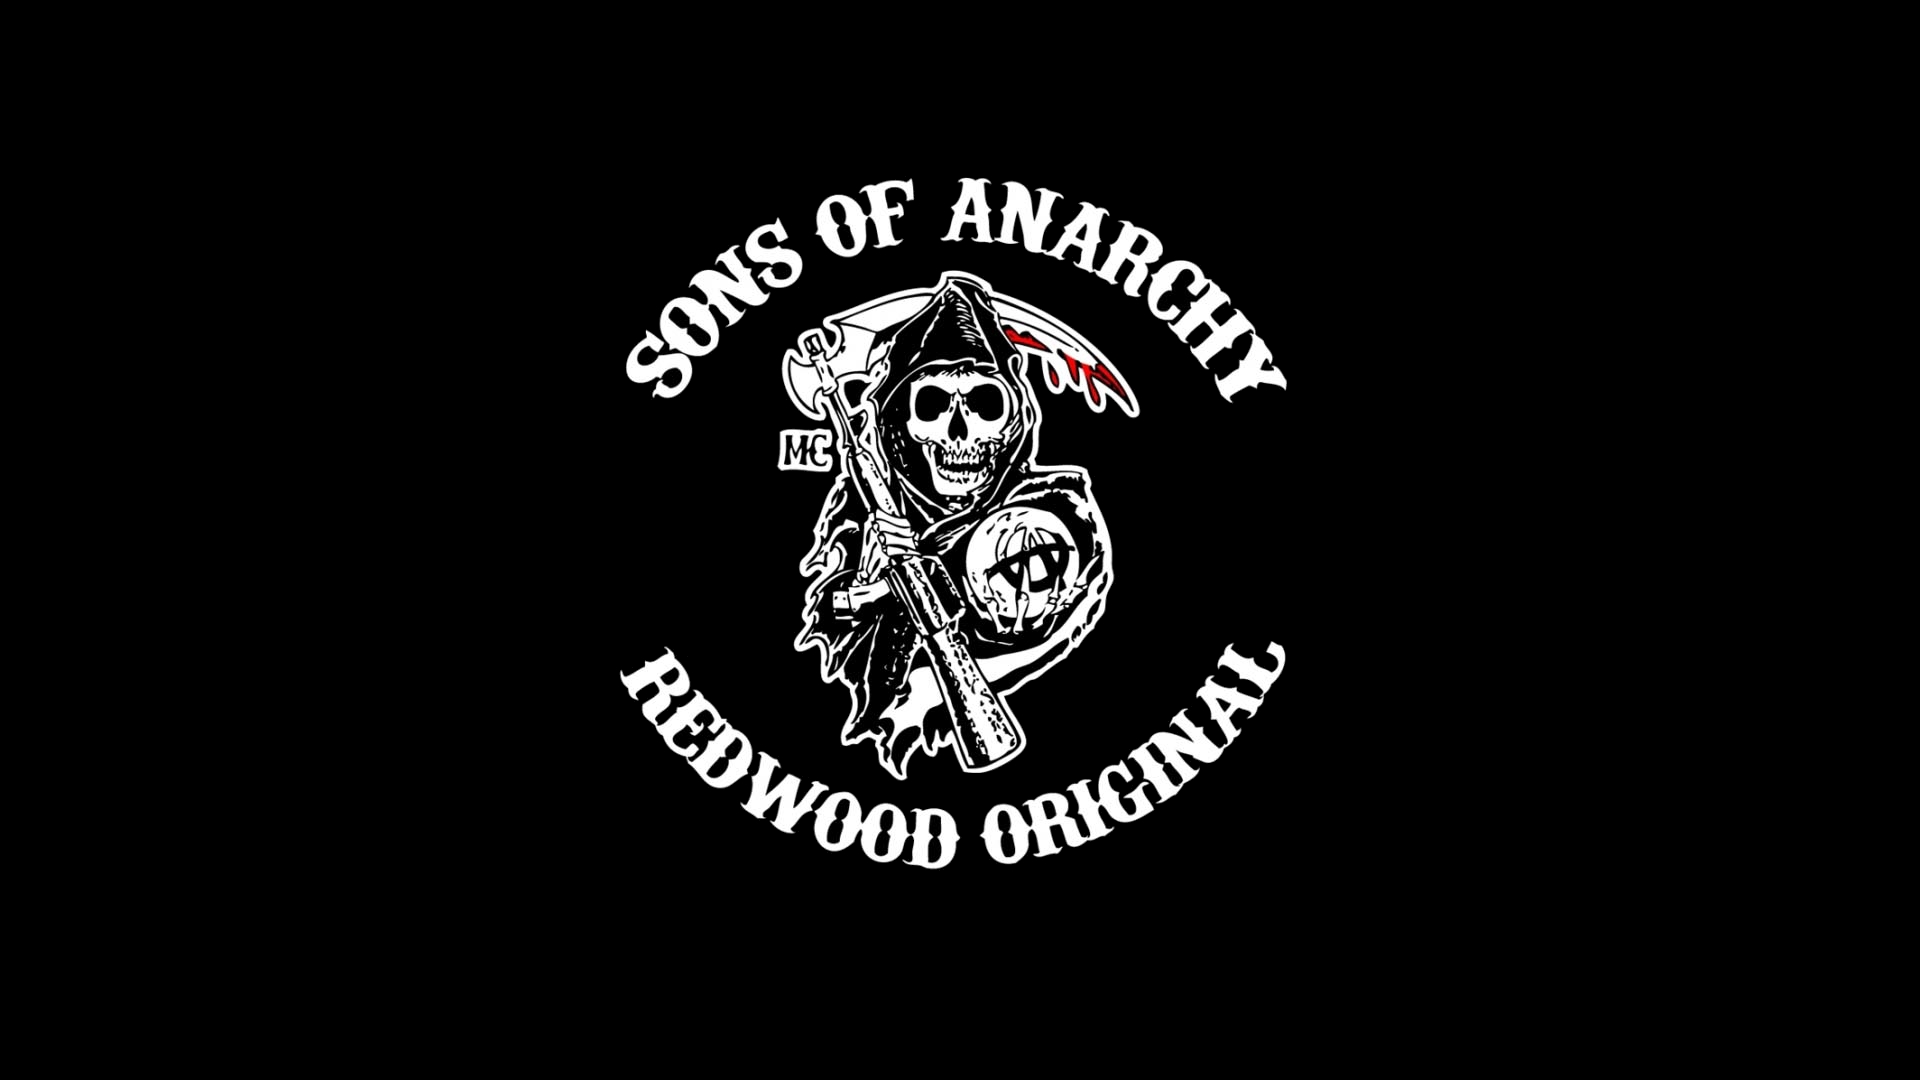 Sons Of Anarchy Background Wallpaper